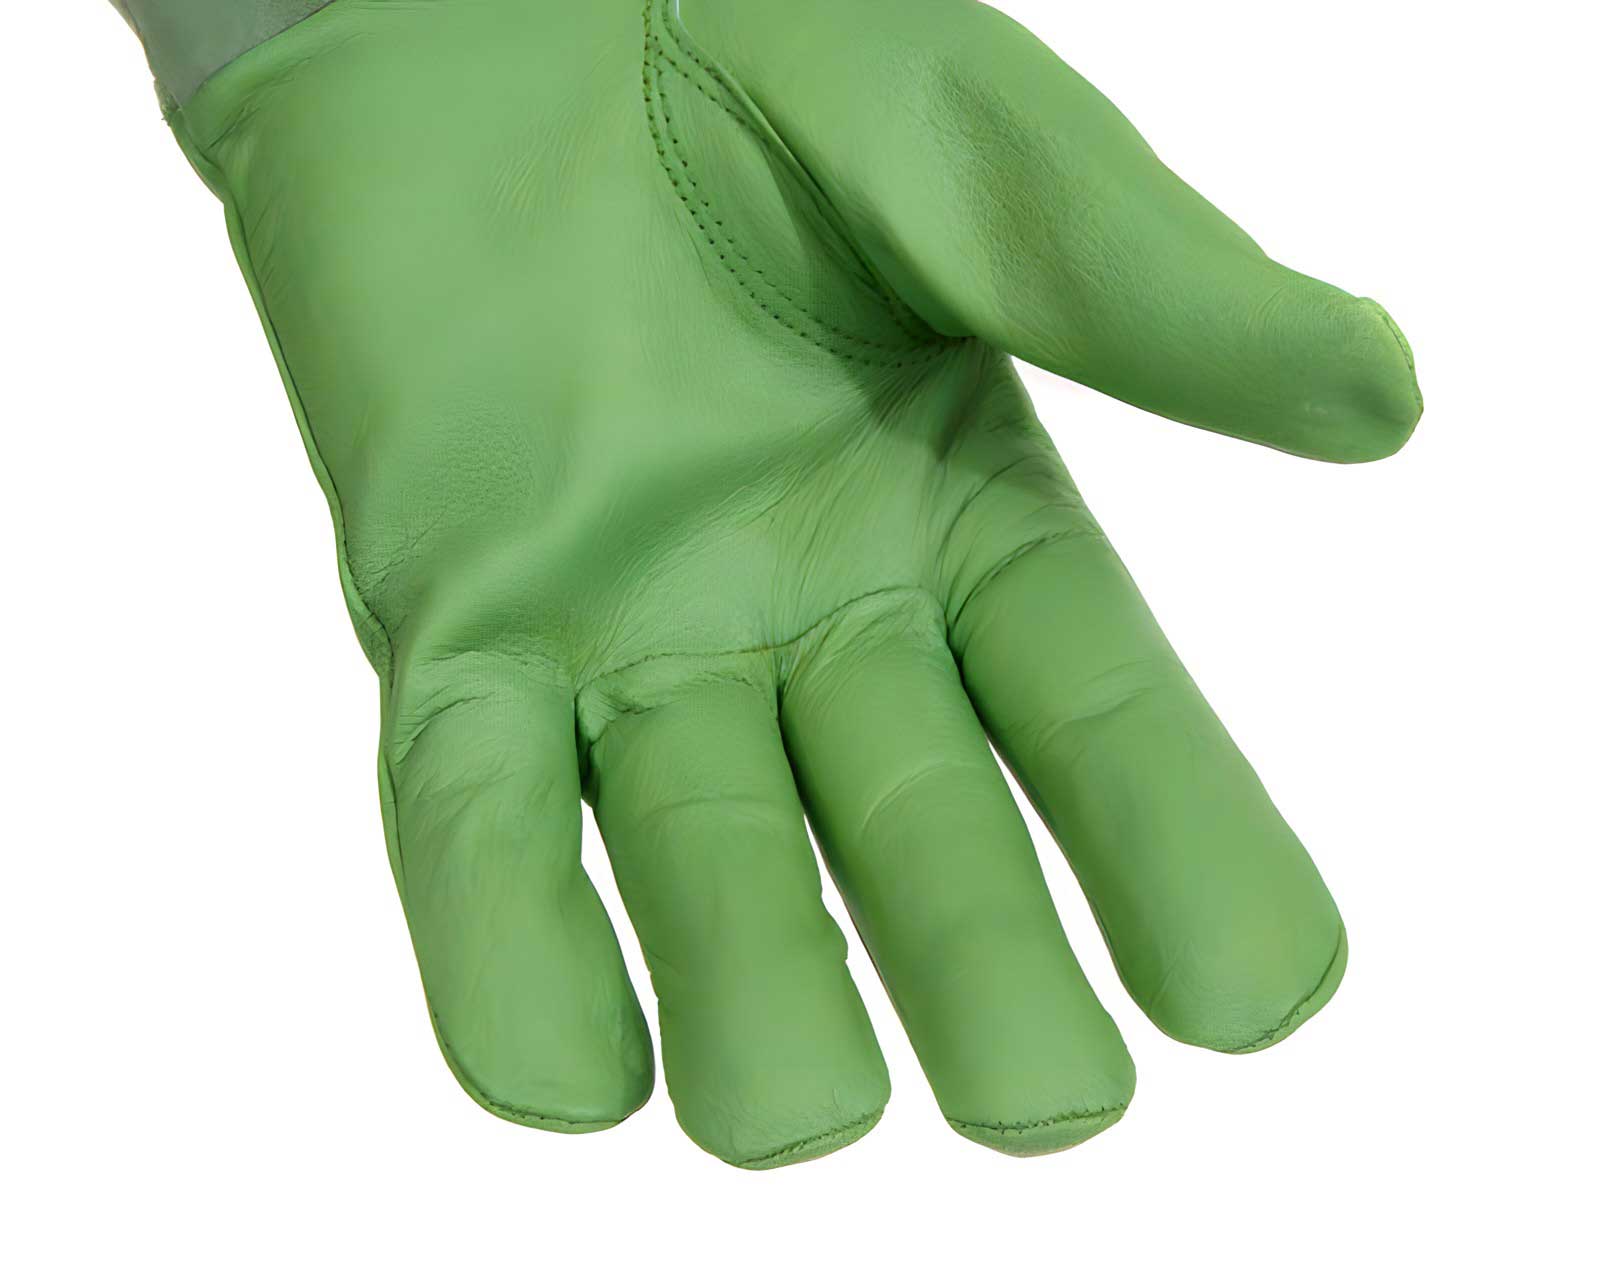 Scratch Protector Gloves - made from quality leather for durability.